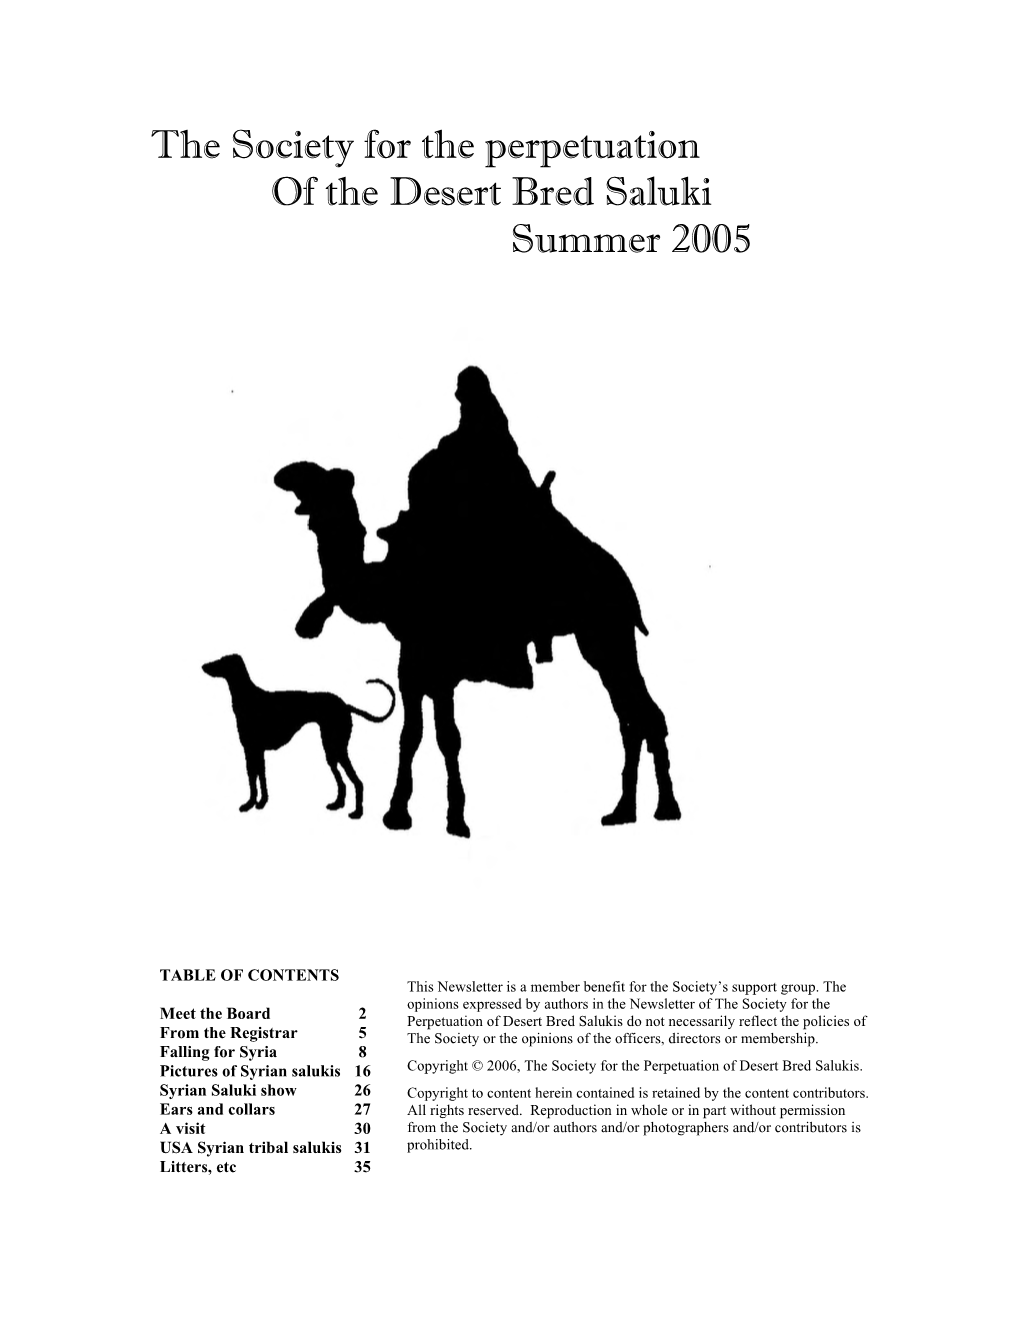 The Society for the Perpetuation of the Desert Bred Saluki Summer 2005